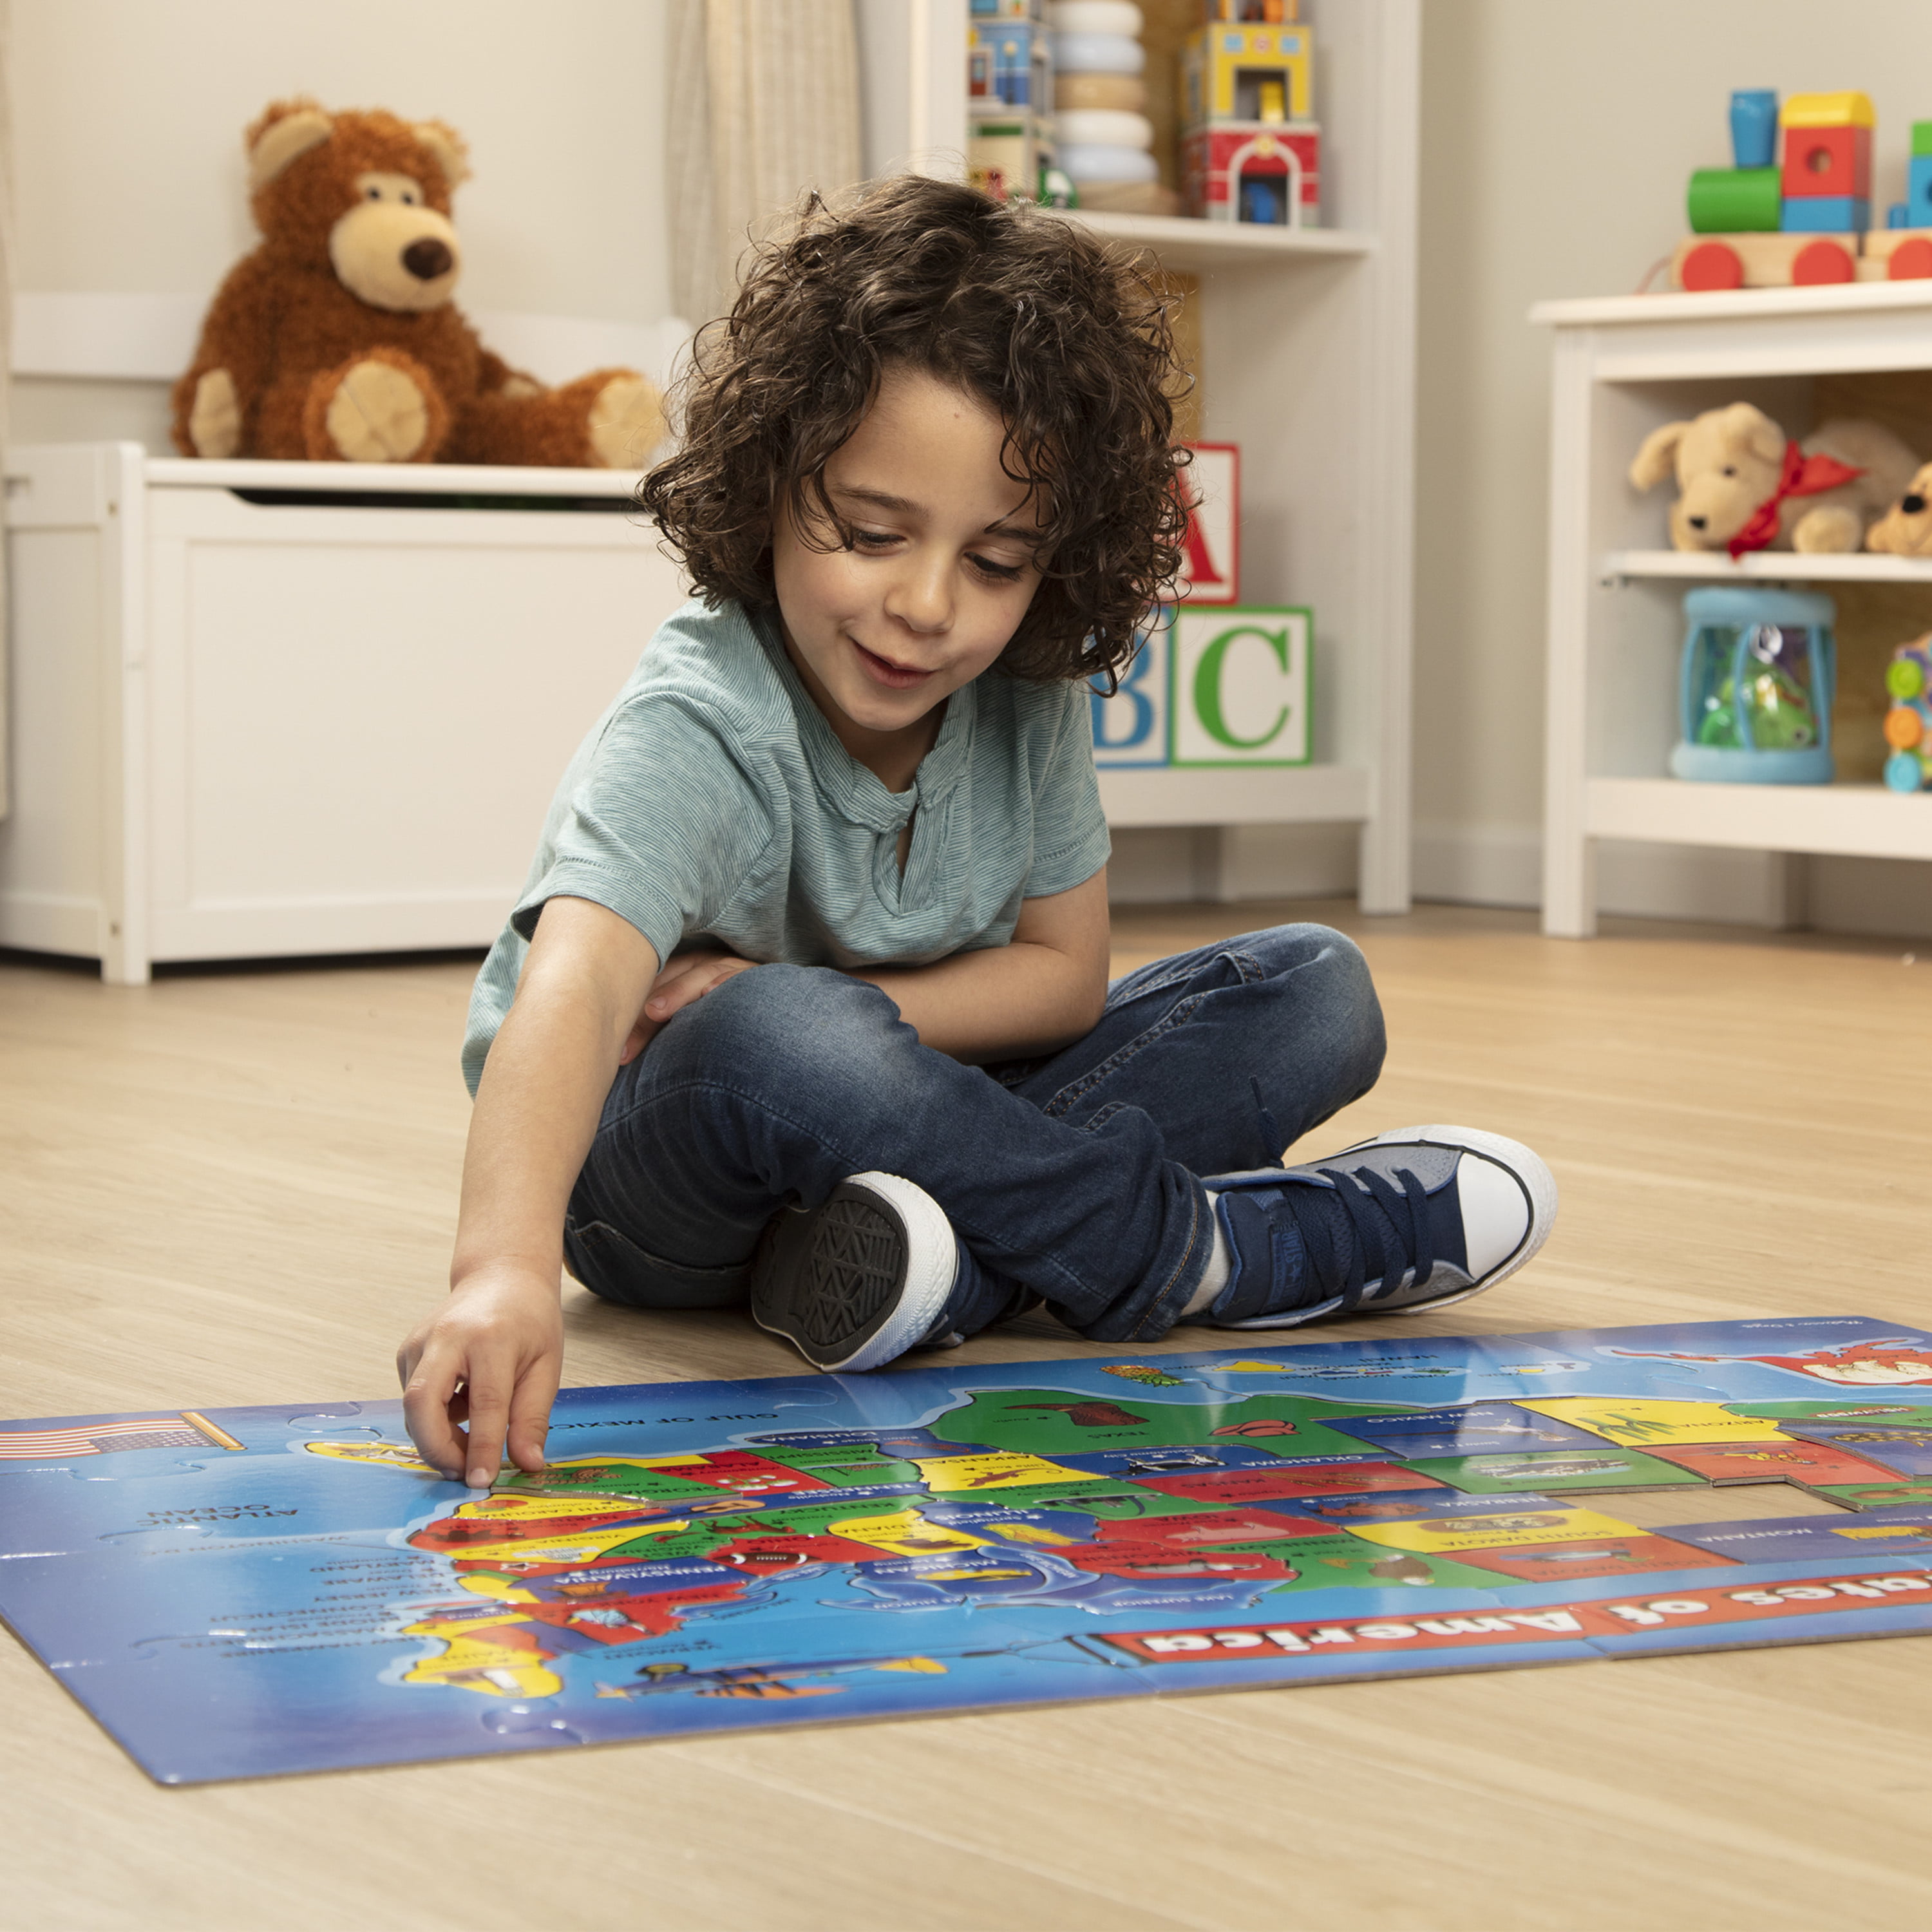 Buy Melissa & Doug USA Map Floor Puzzle - 51 Pieces (2 x 3 feet) Online at  Lowest Price in Ghana. 33359764